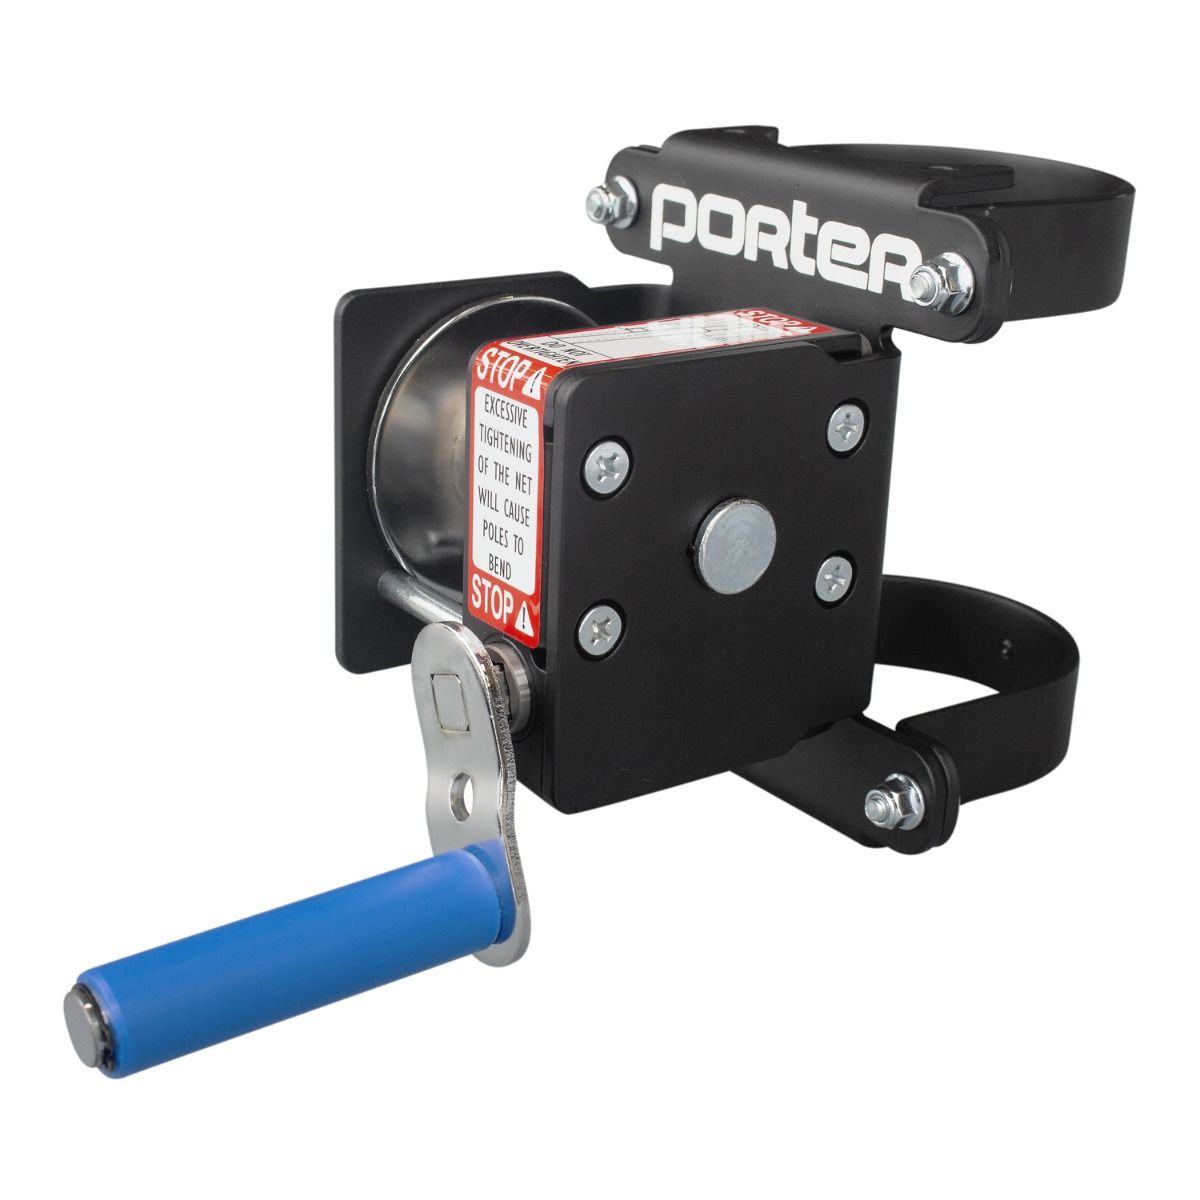 Porter Powr-Select Universal Volleyball Upright Winch